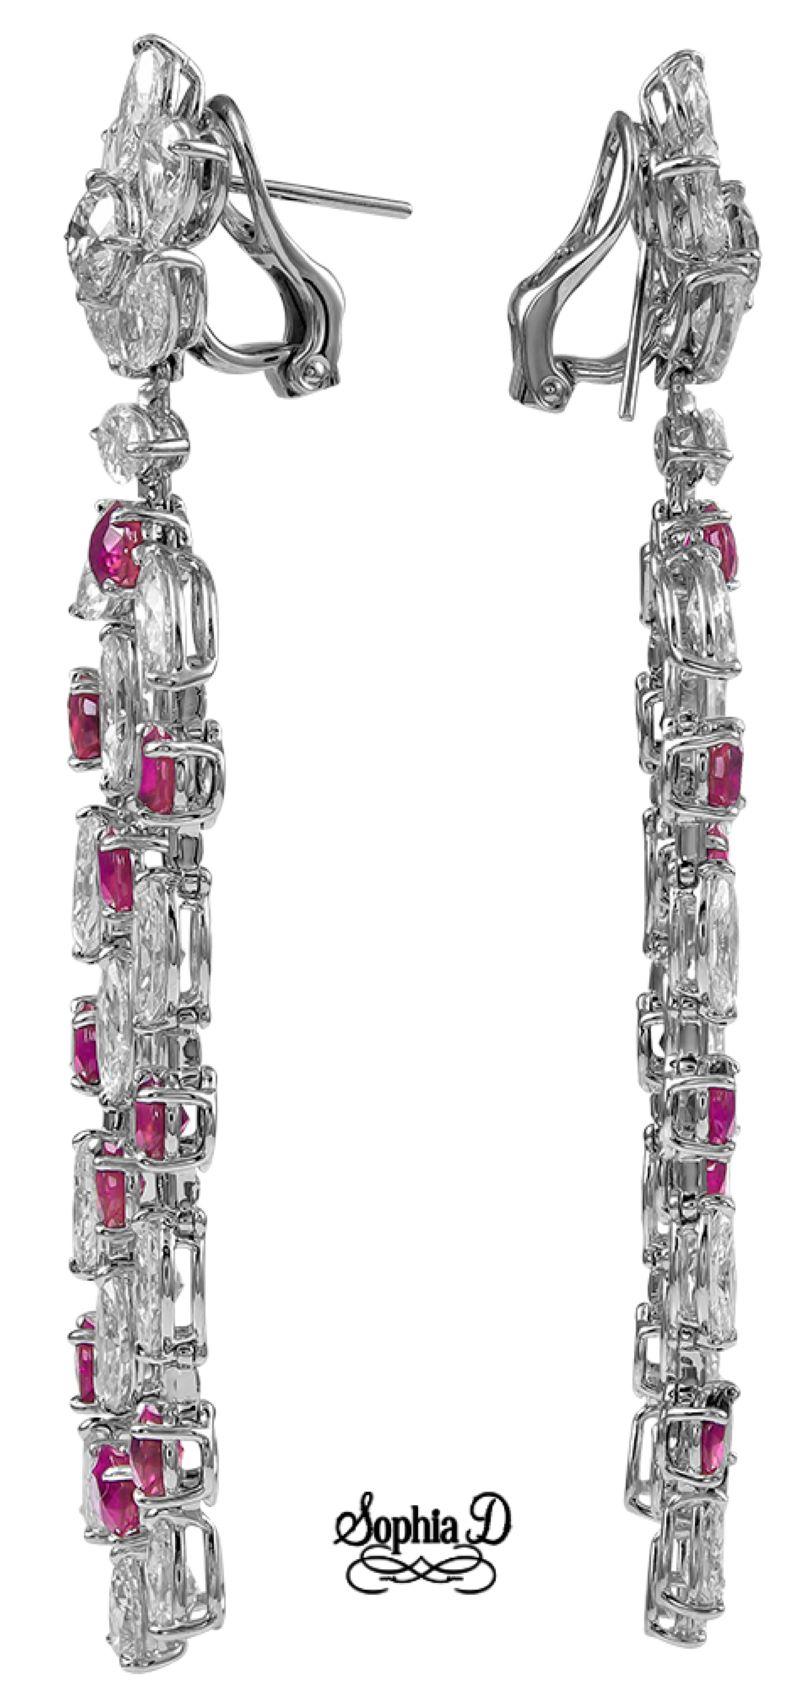 Platinum earrings by Sophia D. that features a 12.46 carats of rubies and 17.21 carats of diamonds. 

Sophia D by Joseph Dardashti LTD has been known worldwide for 35 years and are inspired by classic Art Deco design that merges with modern